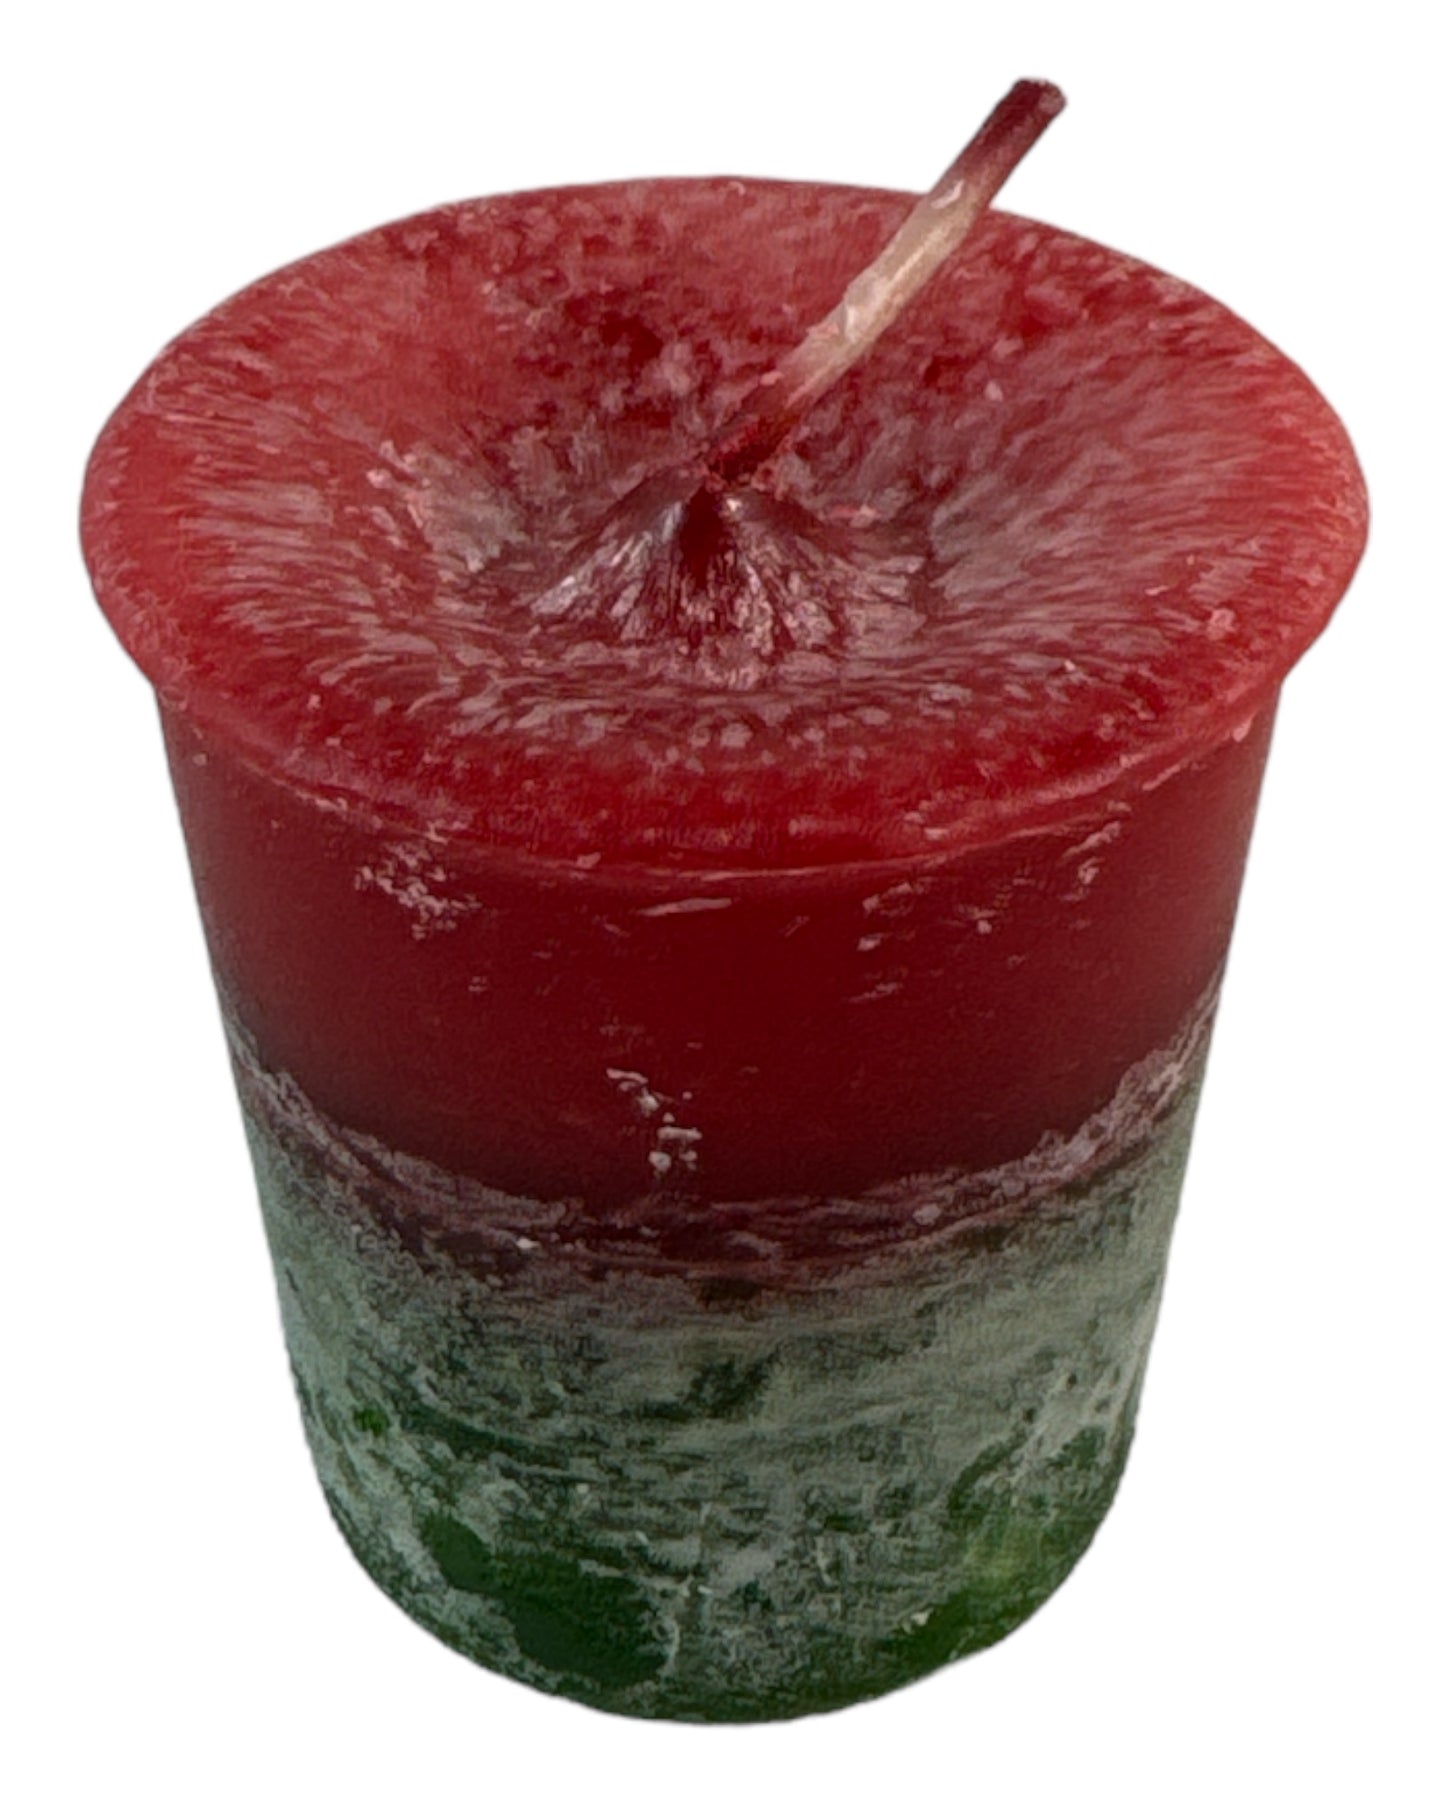 Bayberry and DragonsBlood votive candle